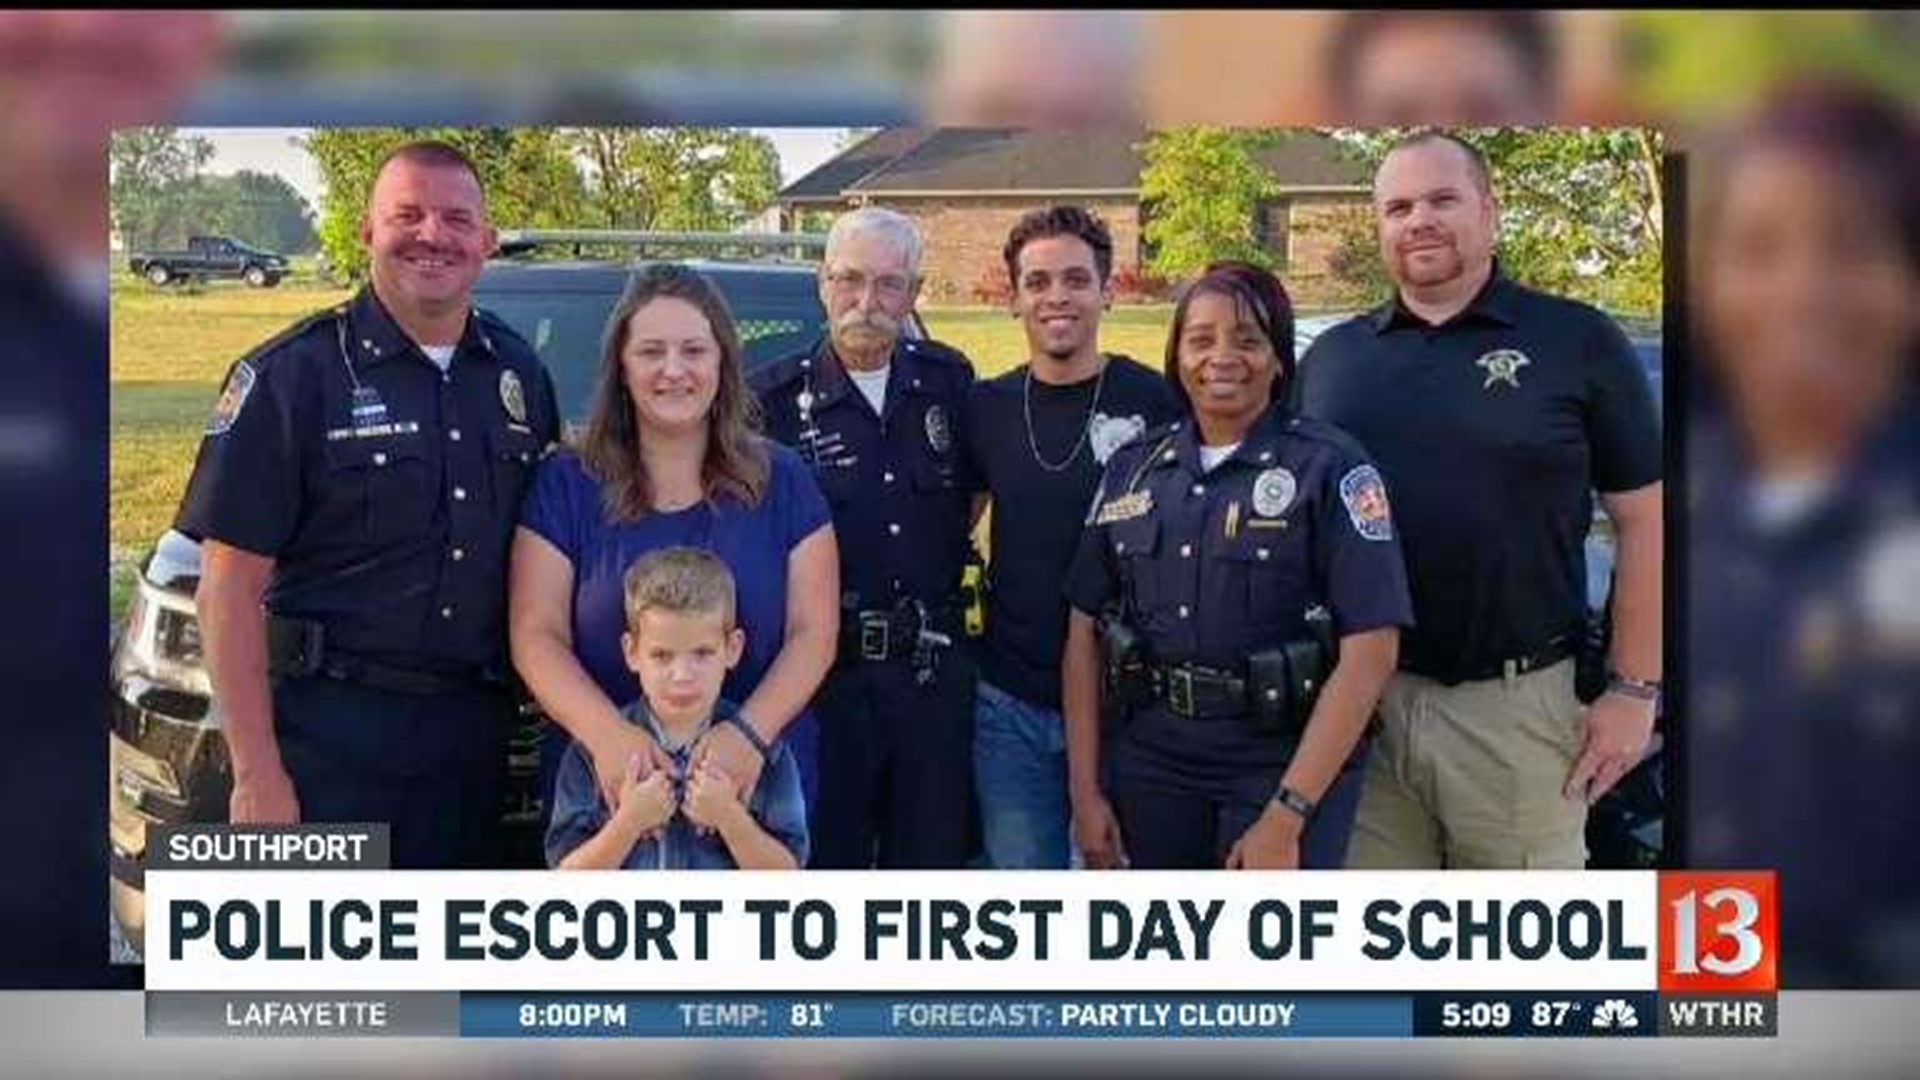 Officers provide escort to first day of school